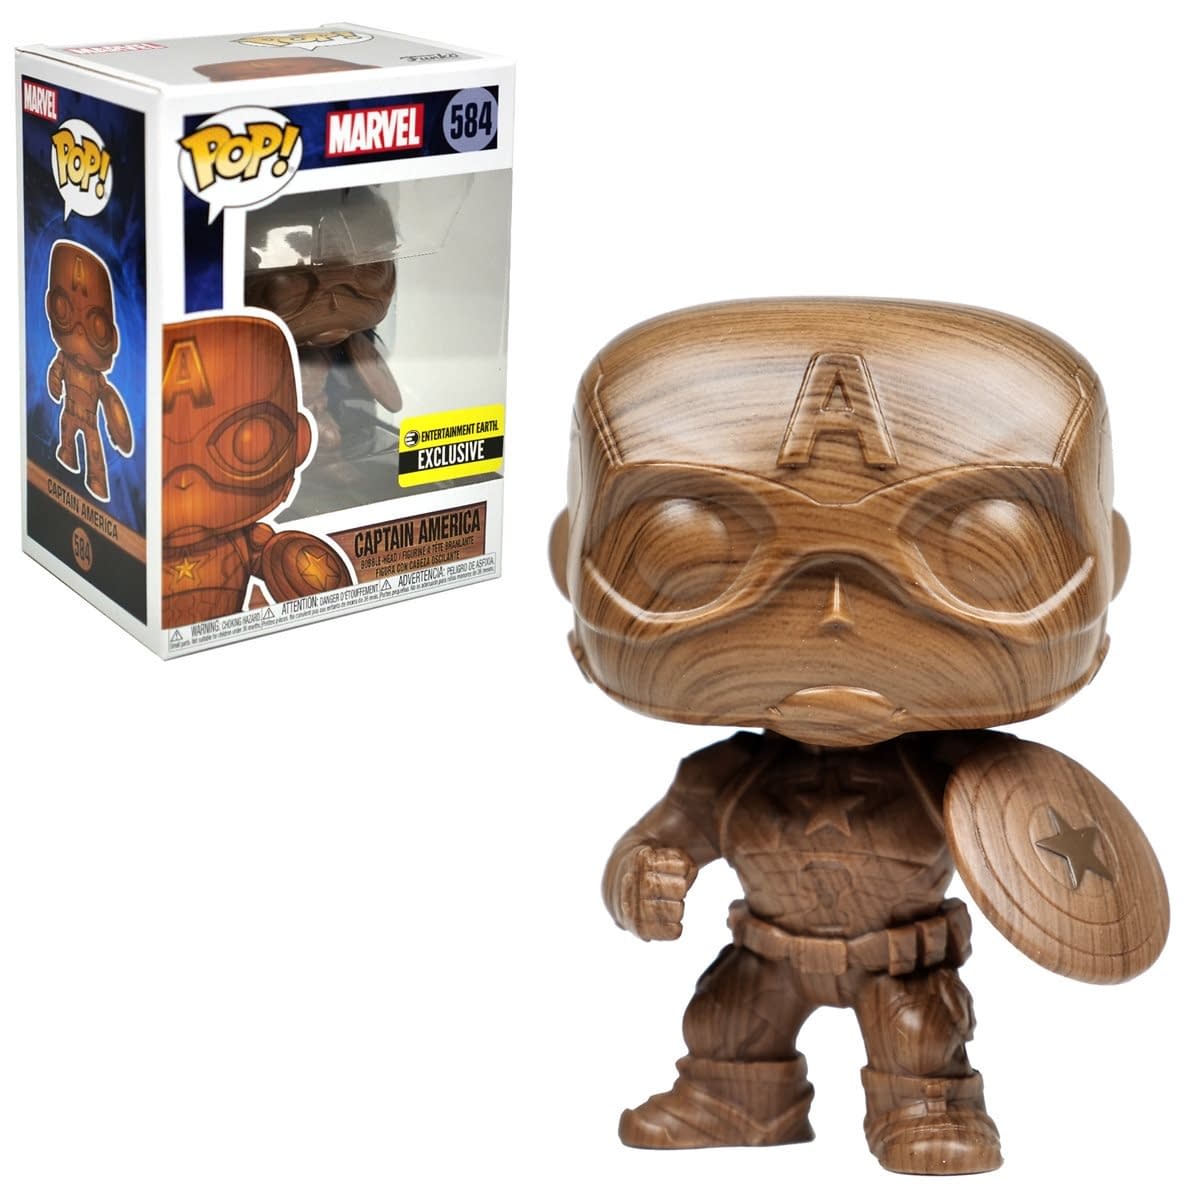 Captain America Gets Wooden in the New Funko Park